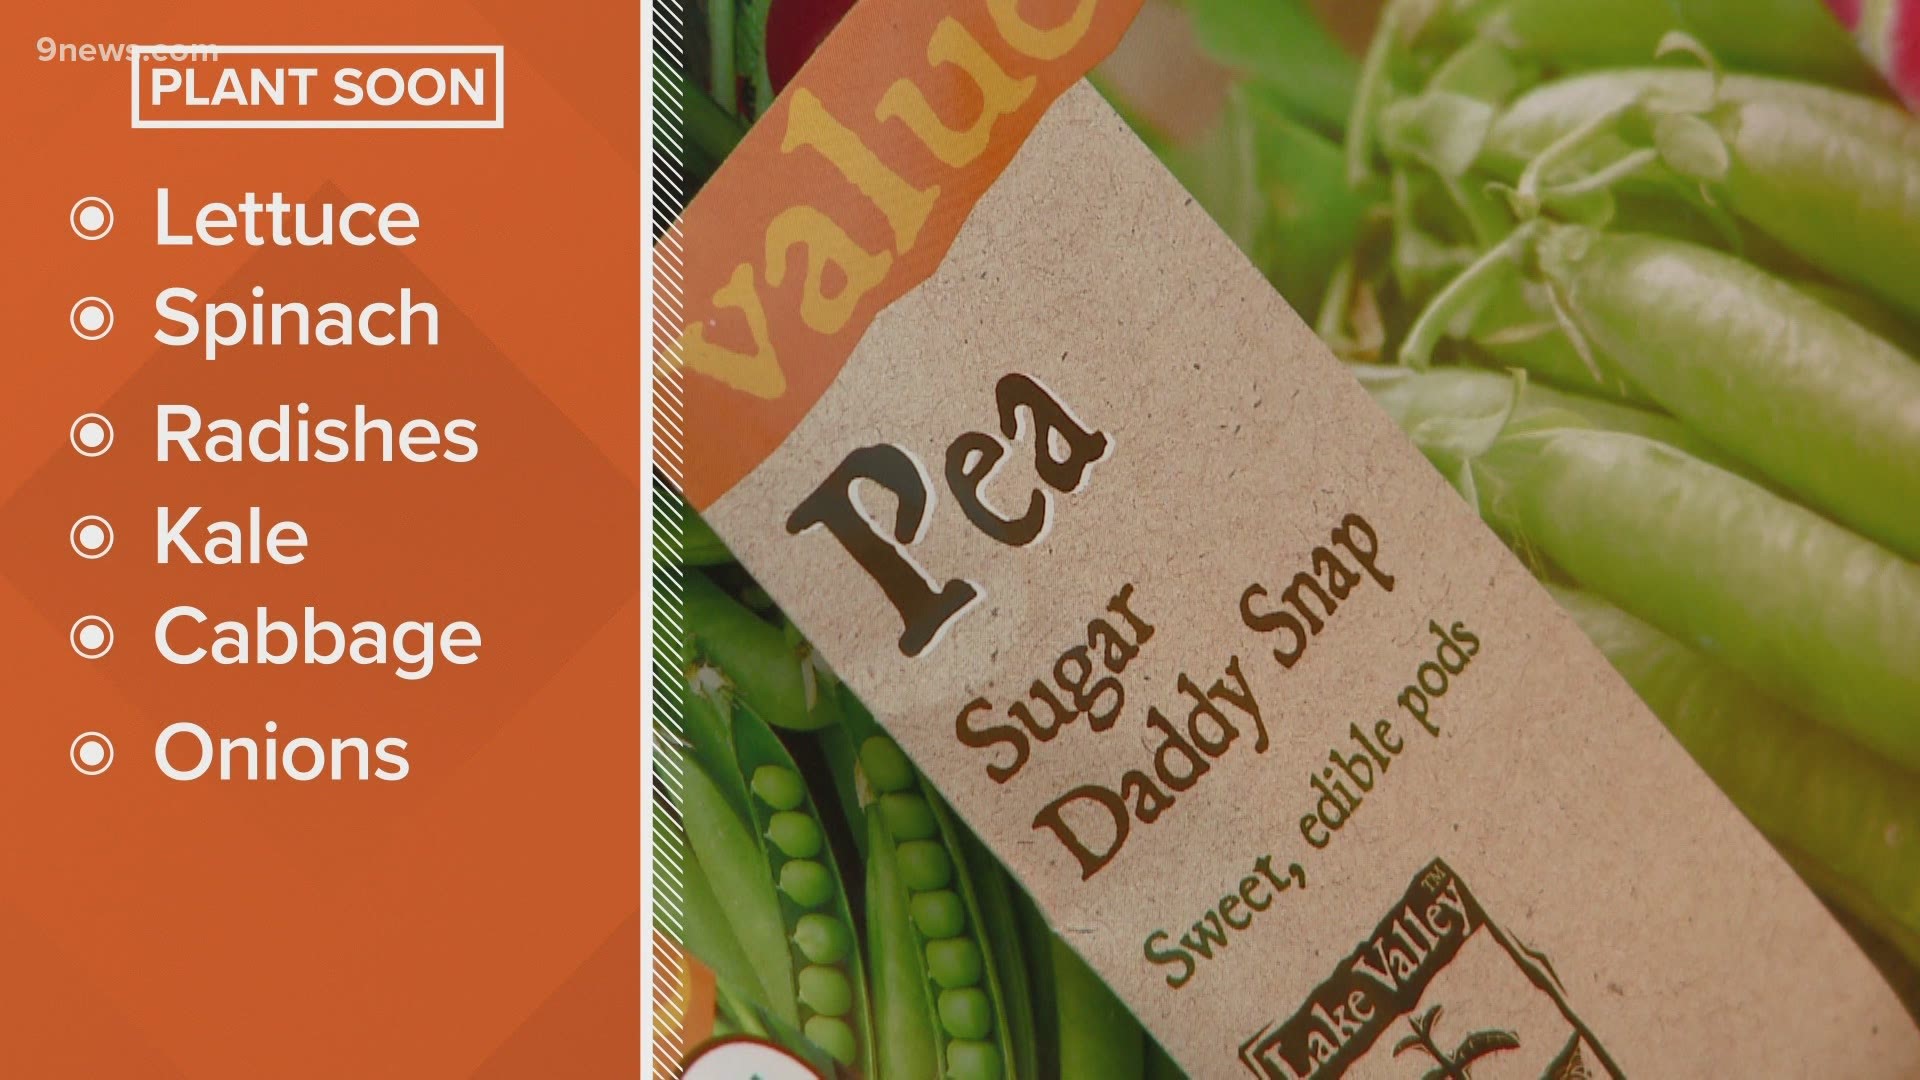 Now is the traditional time to plant peas and potatoes.